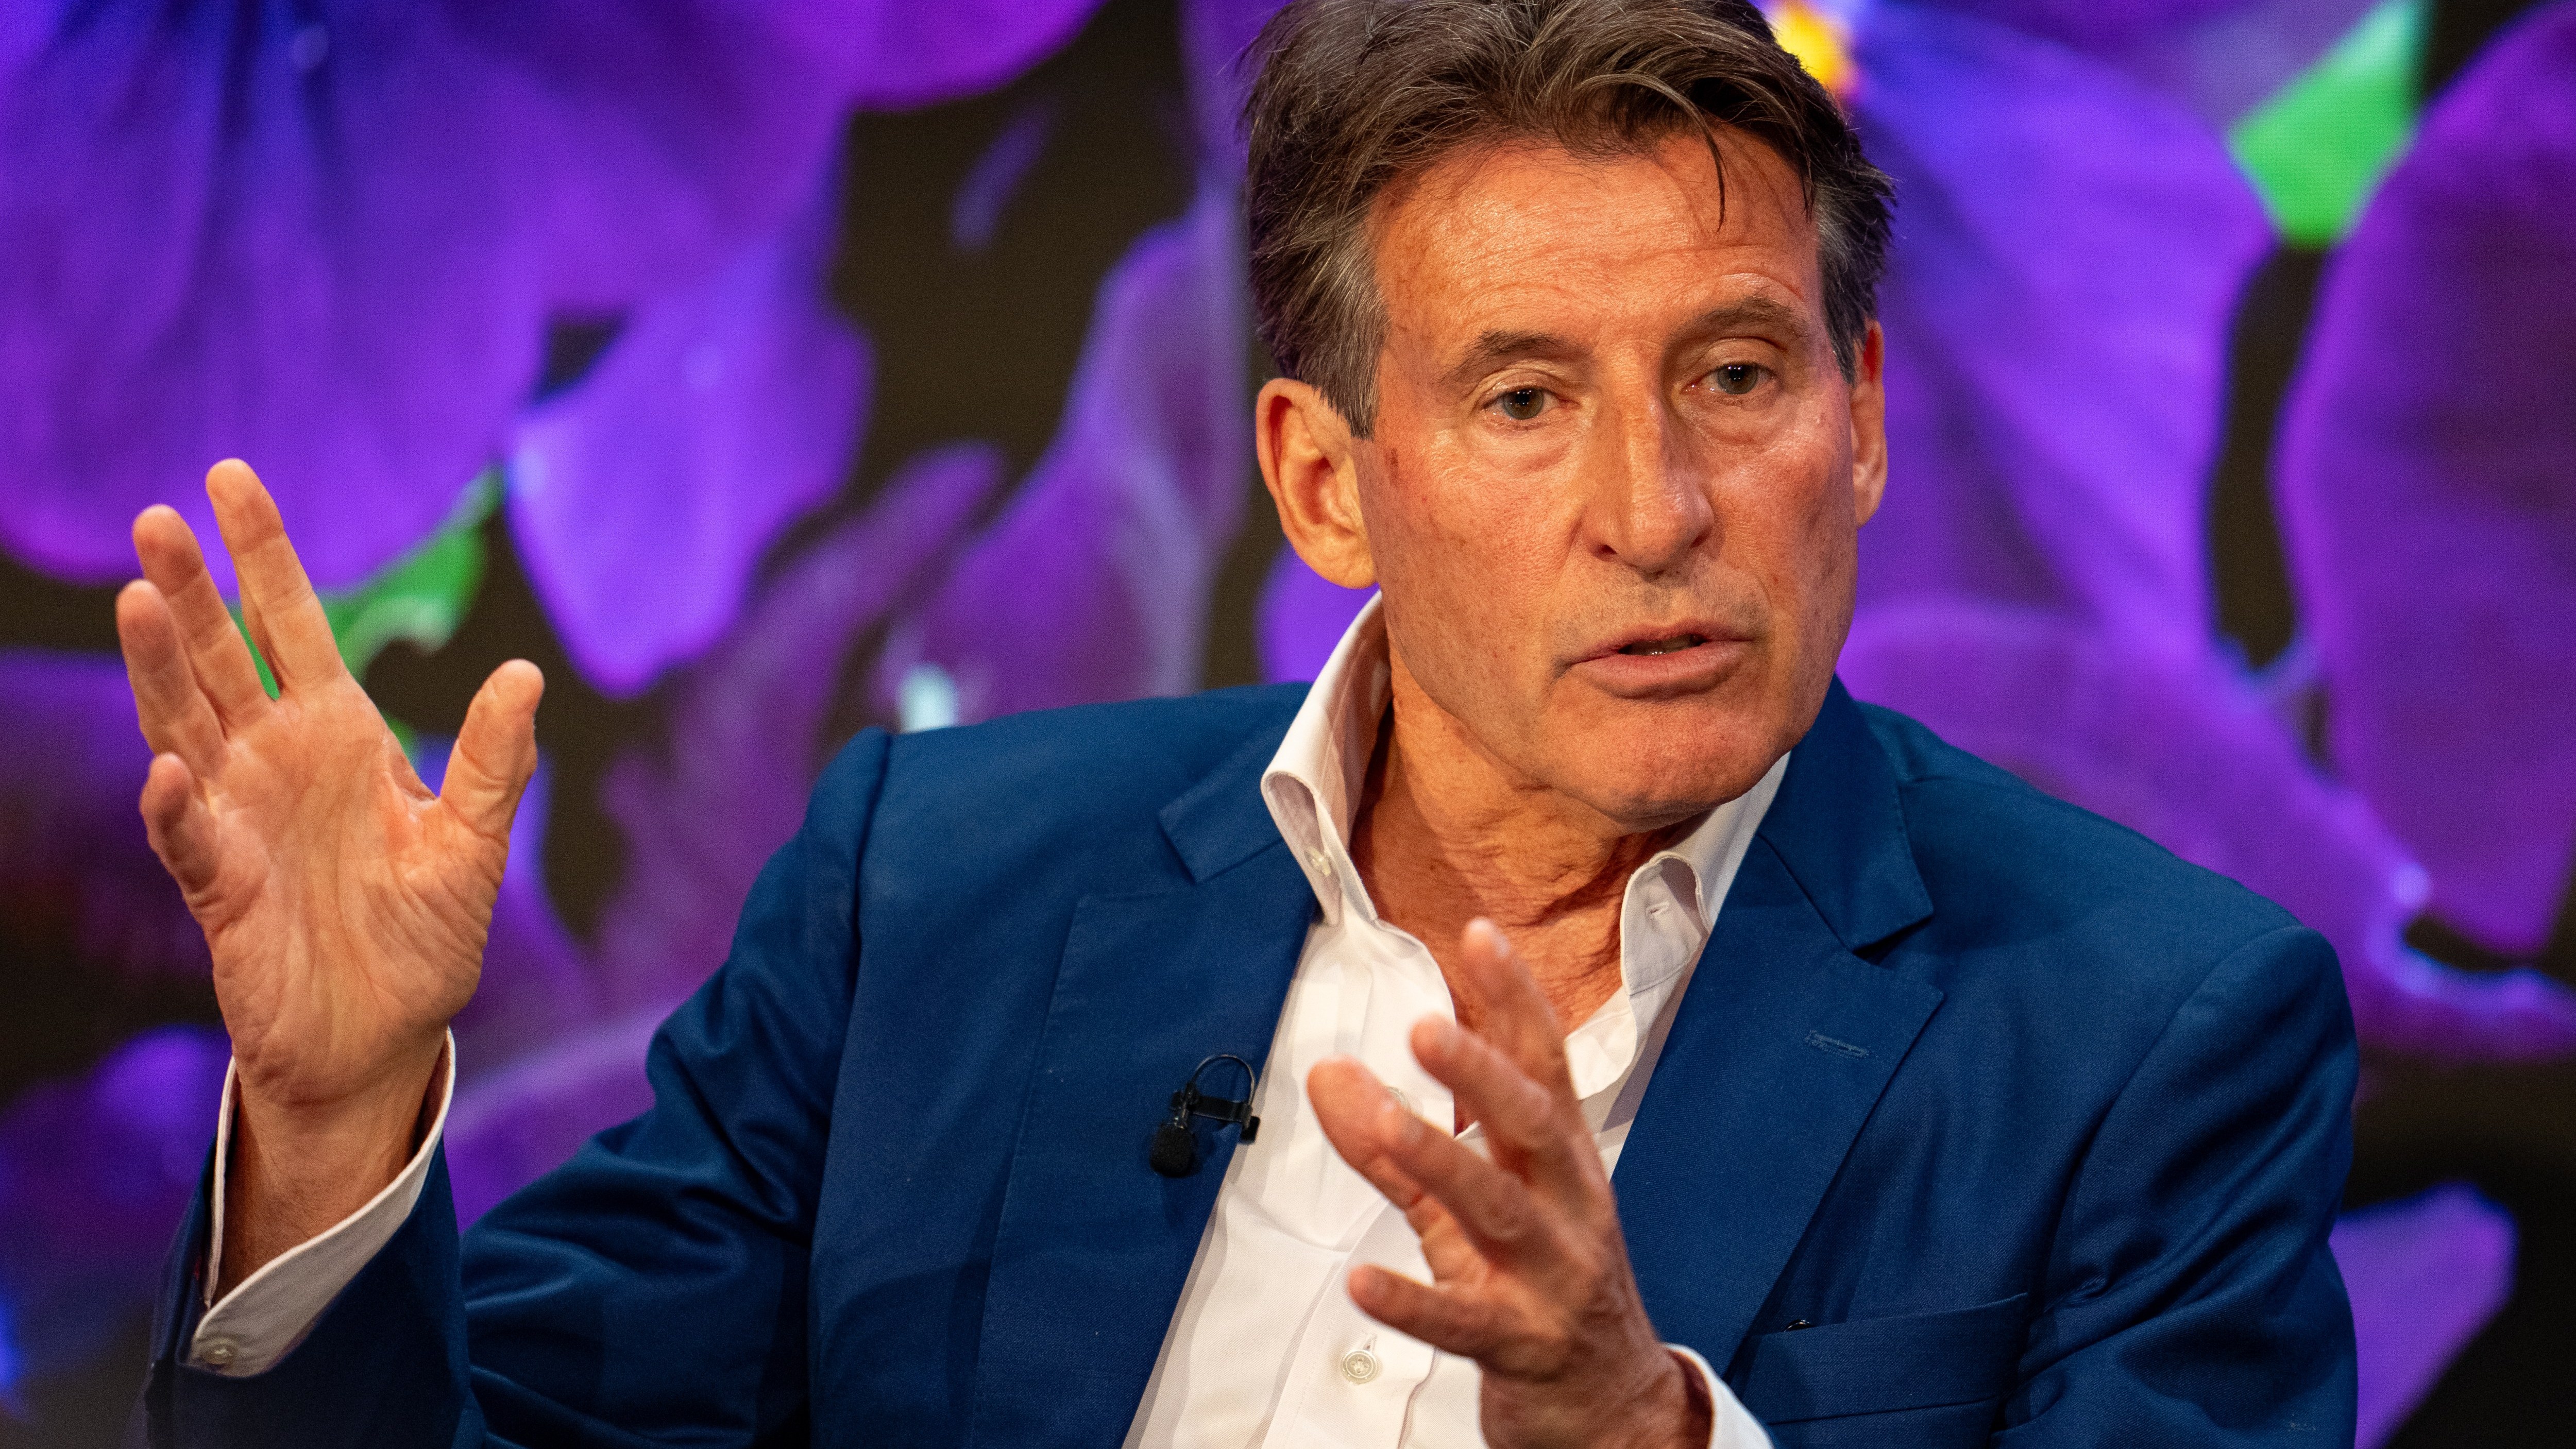 Lord Coe said a World Athletics working group was looking into trans participation in sports